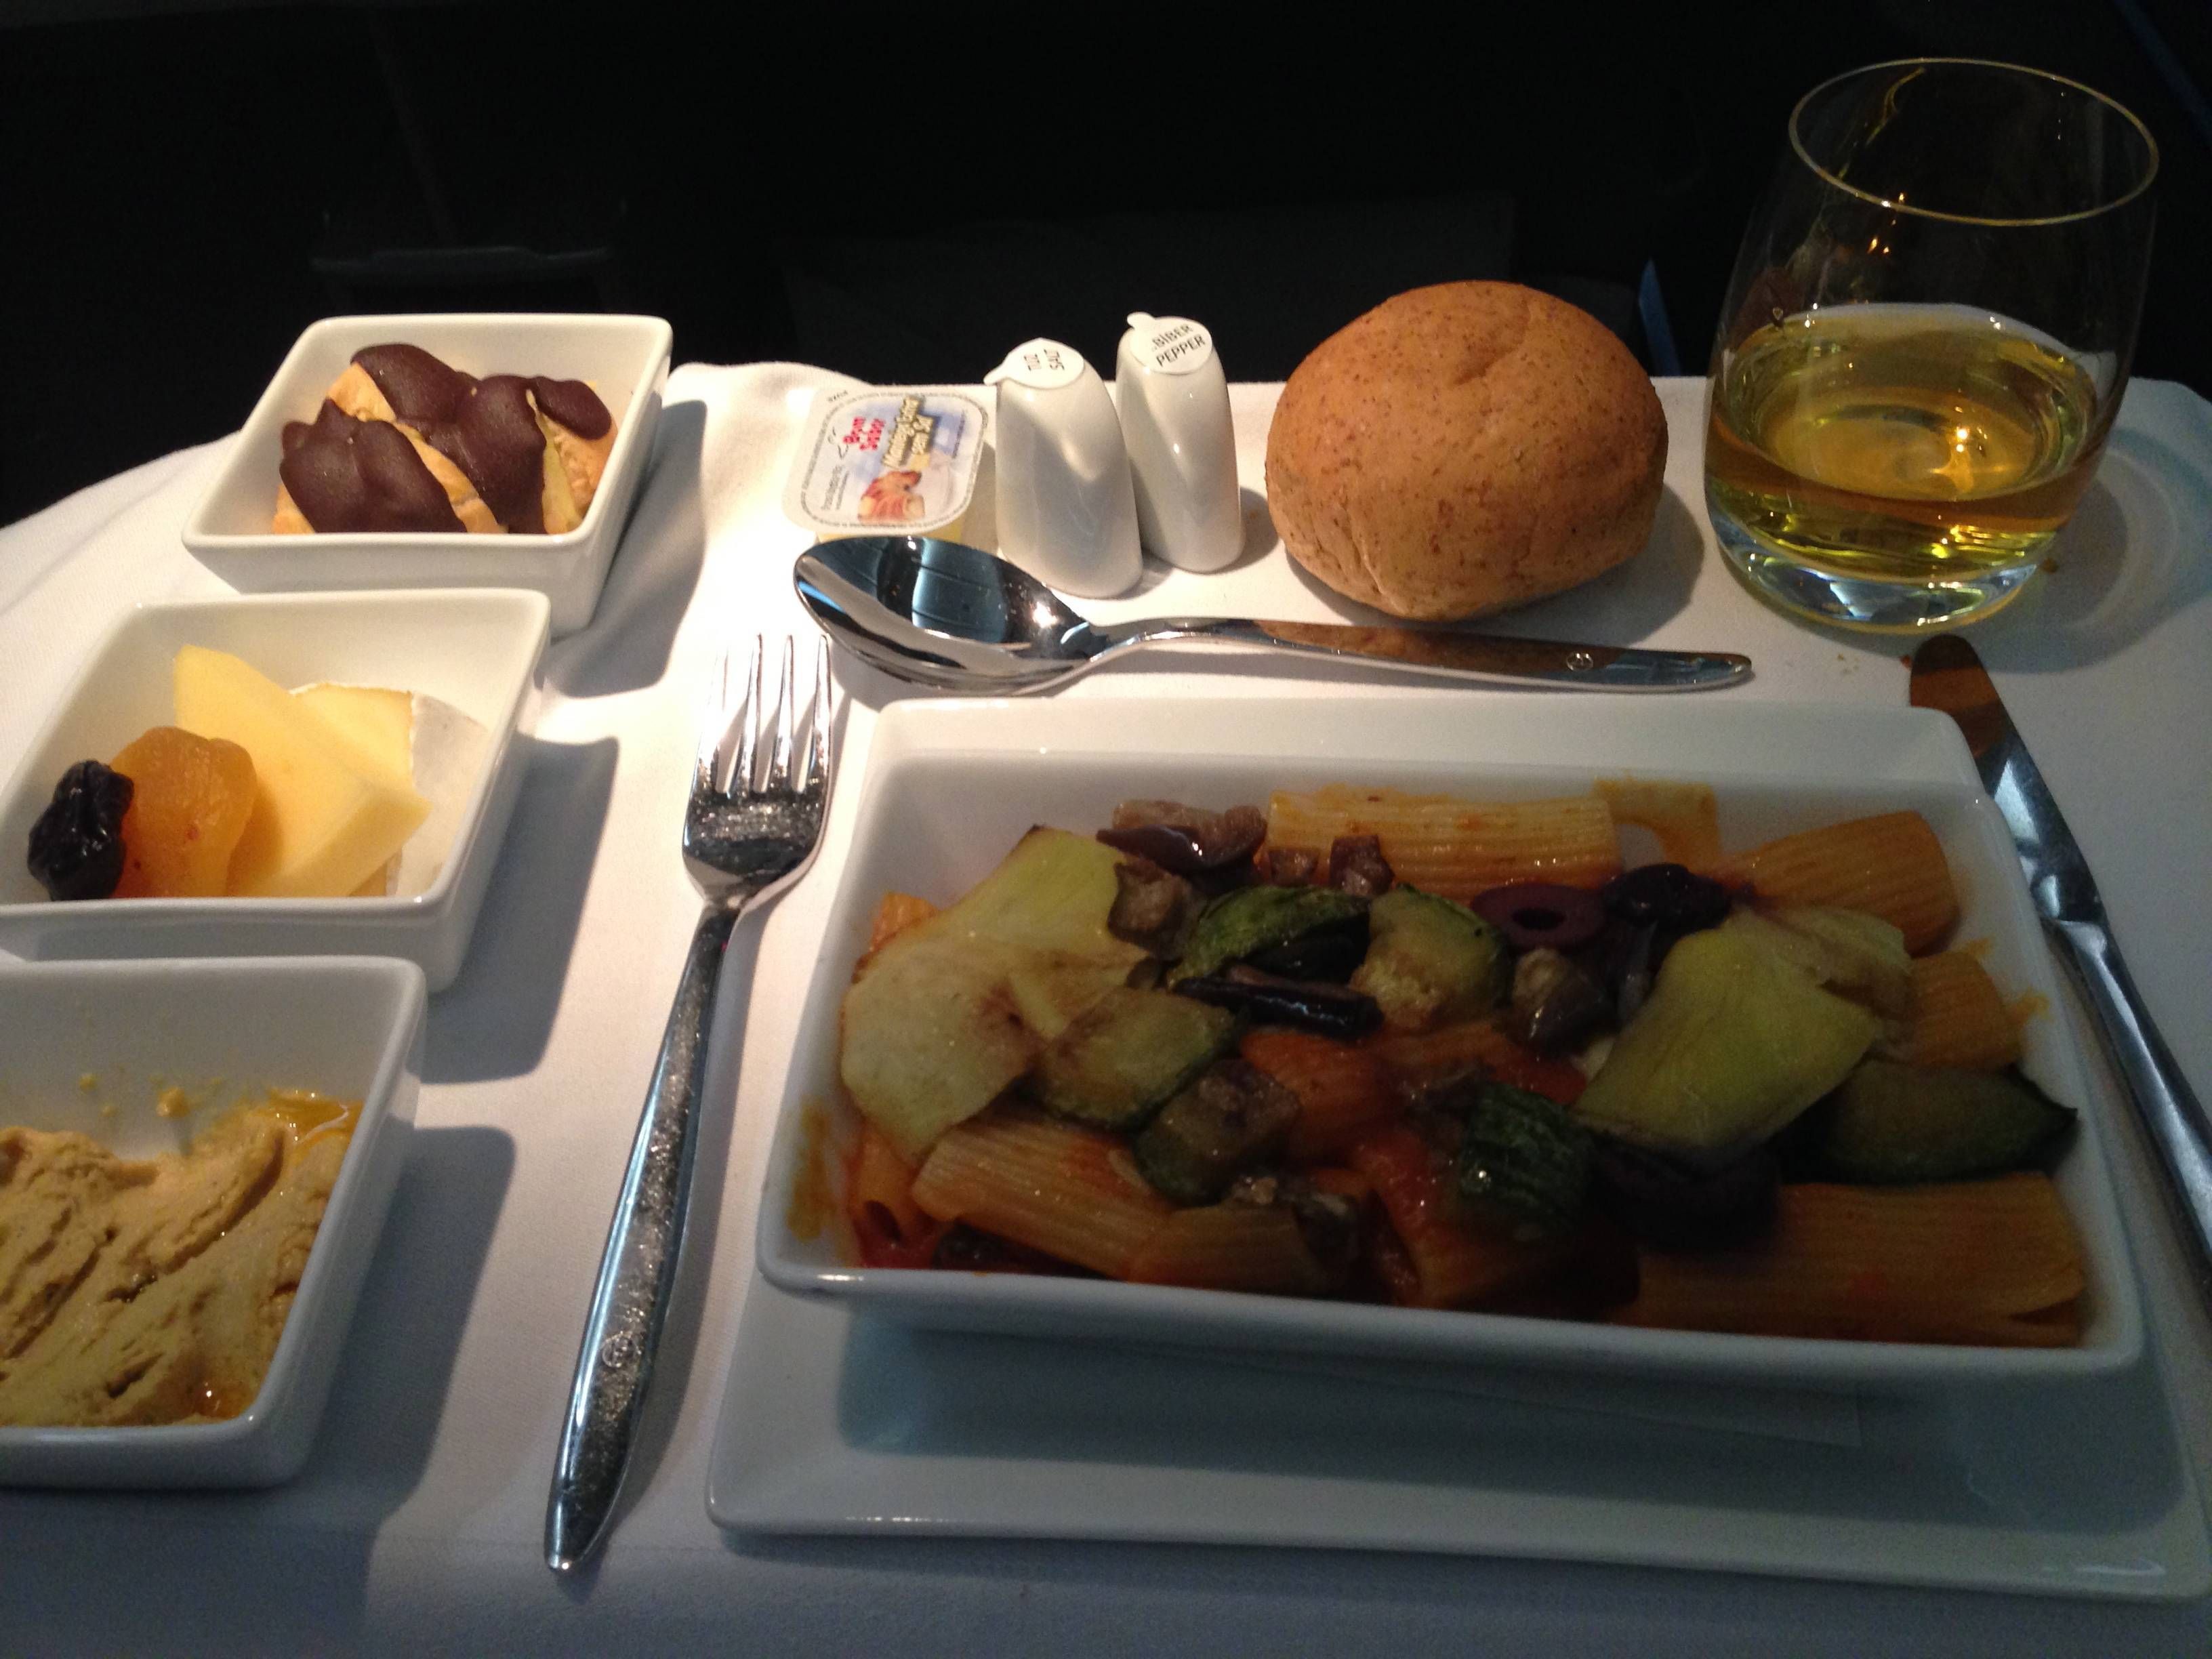 Turkish Airlines Business CLass Executiva A340